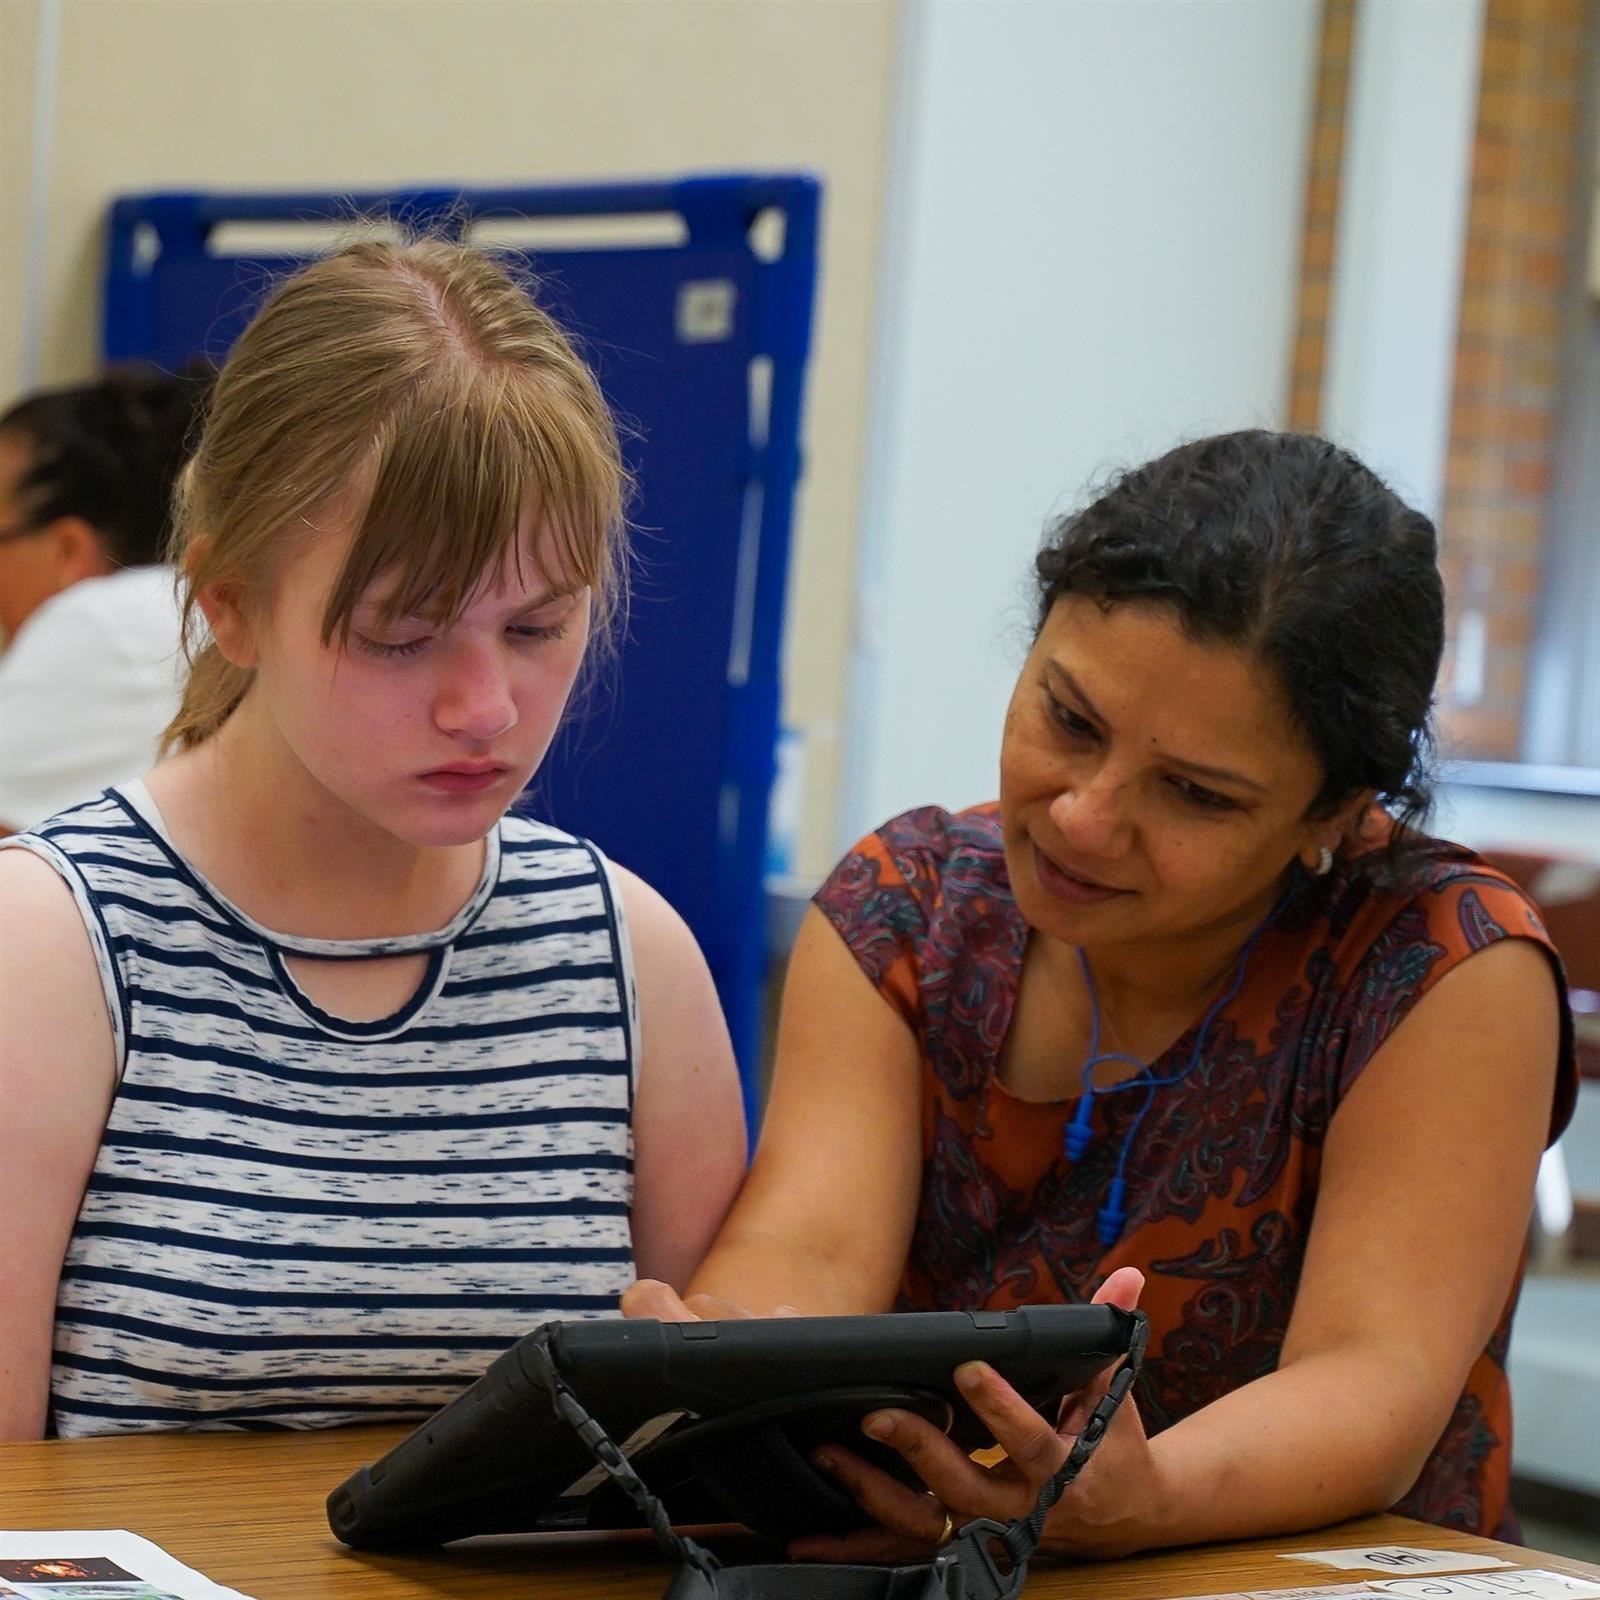 An instructor guides a student using a tablet.